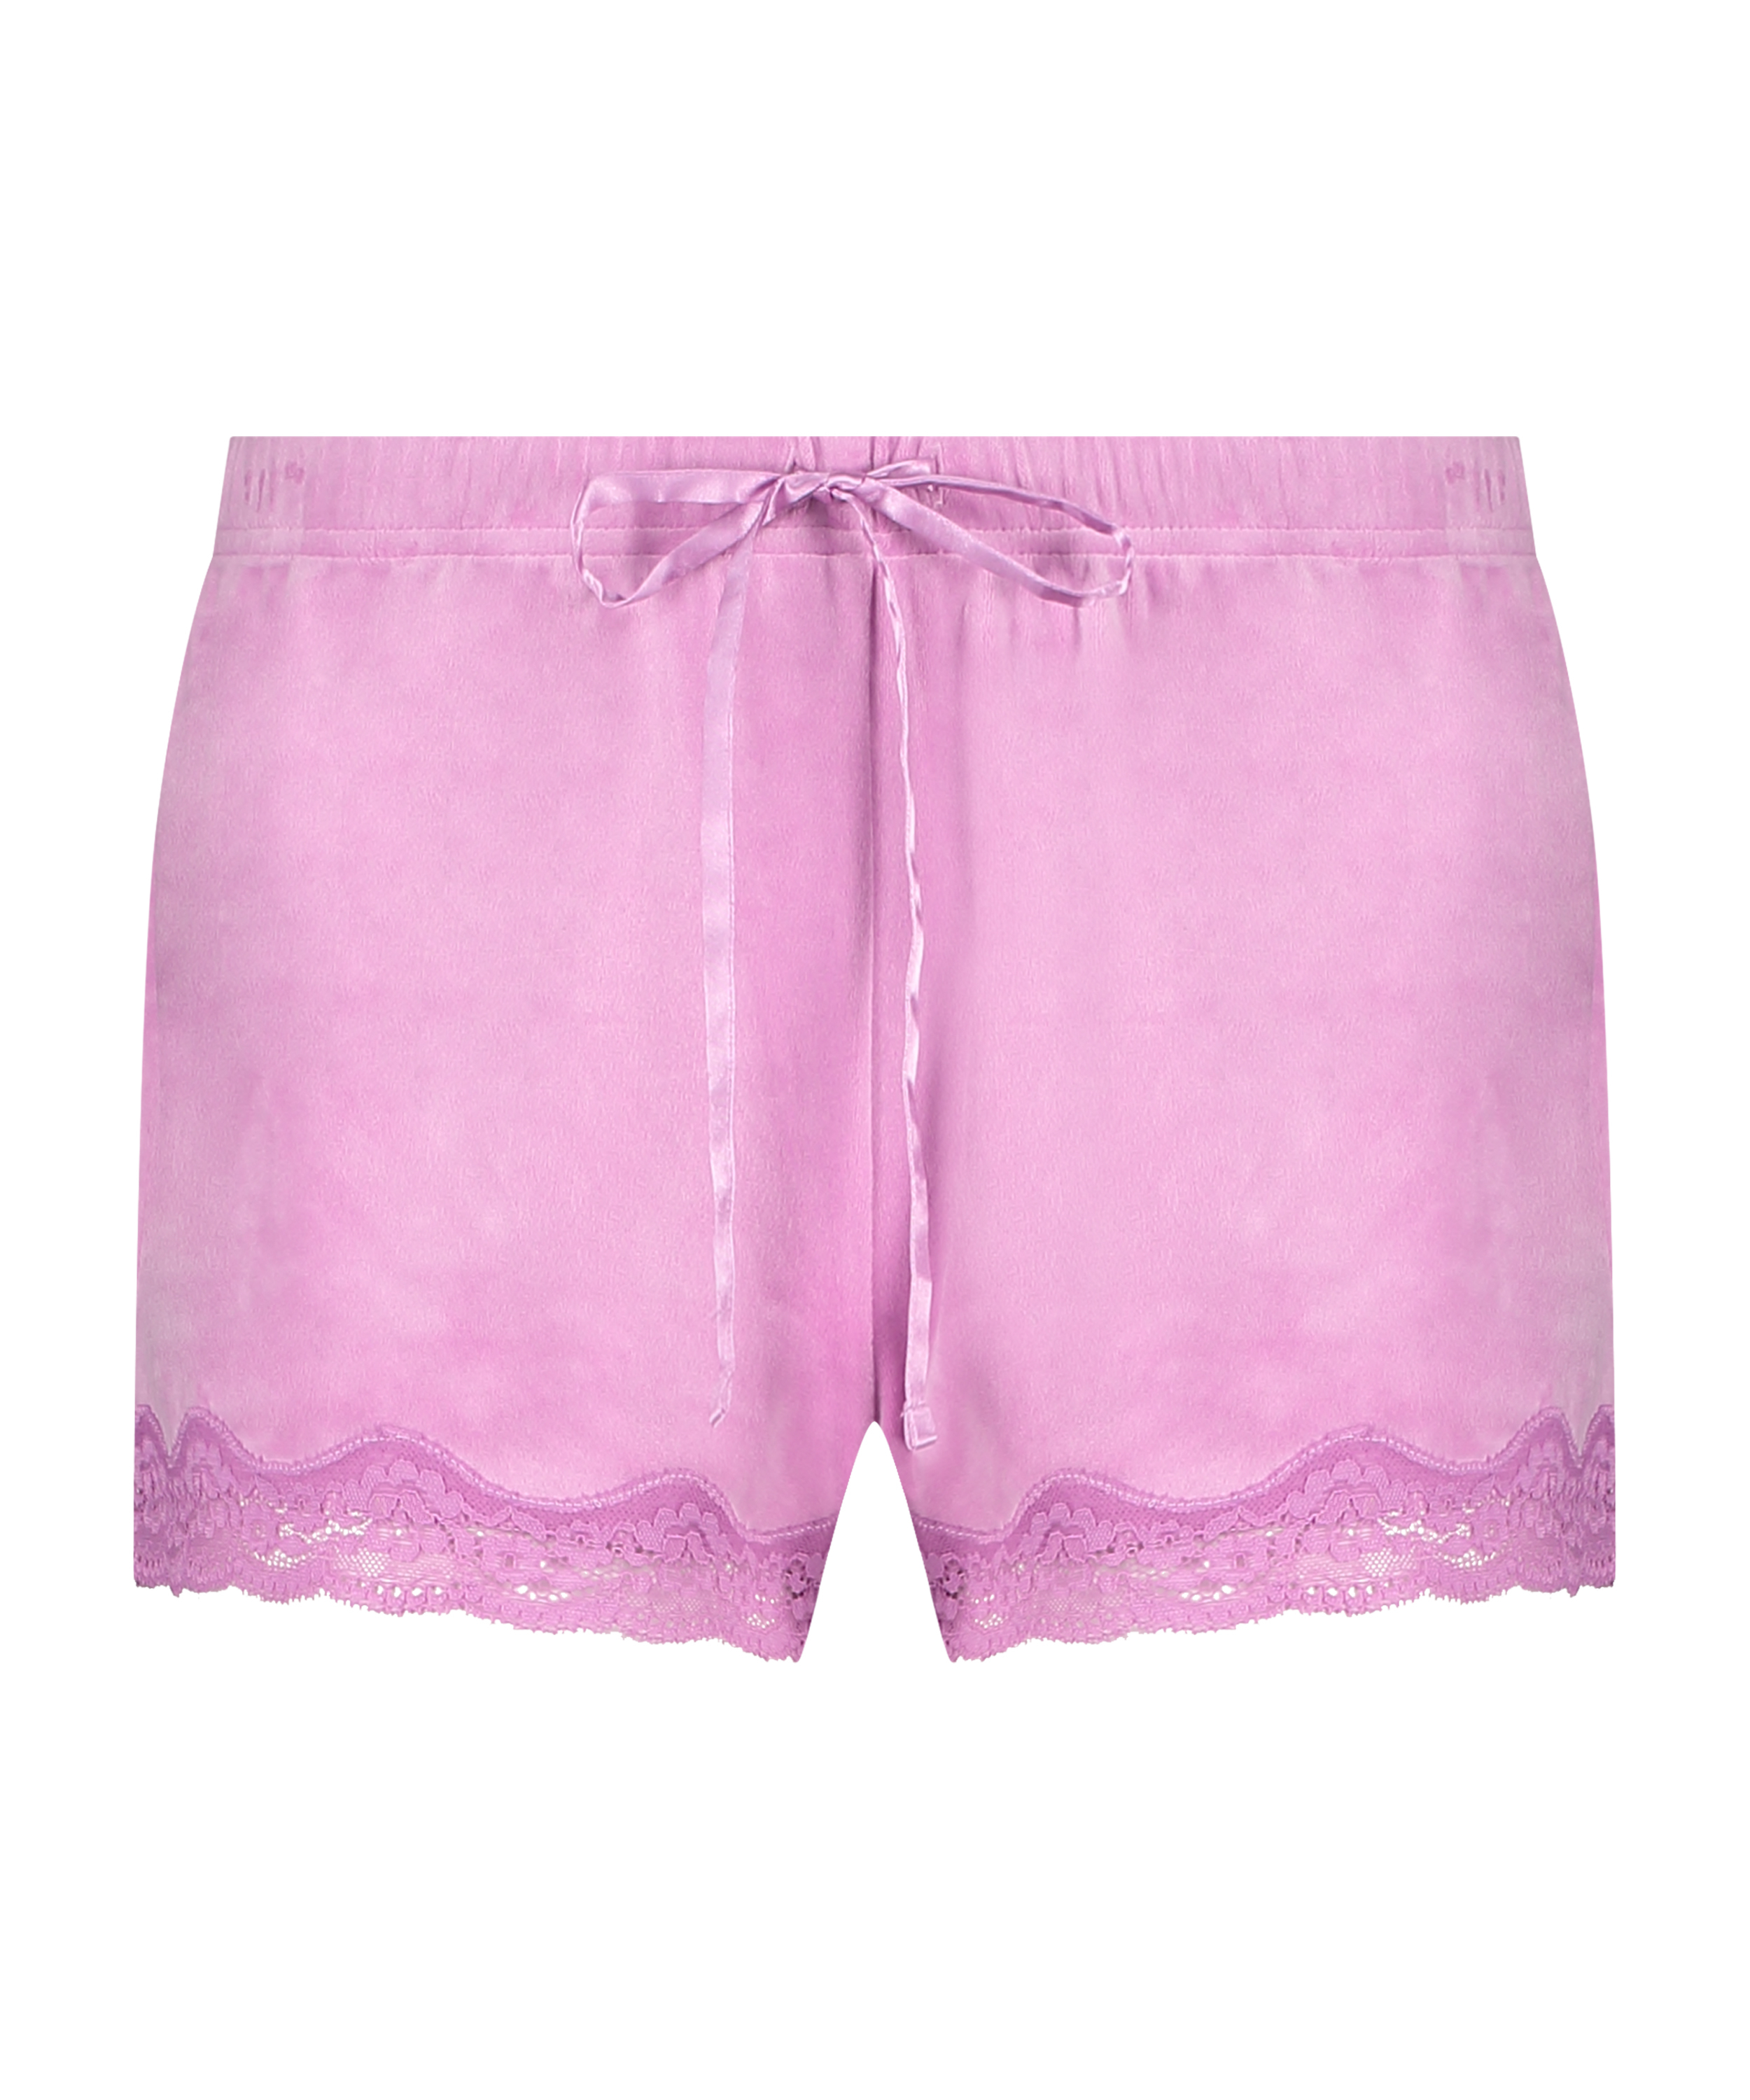 Shorts velour Lace, pink, main